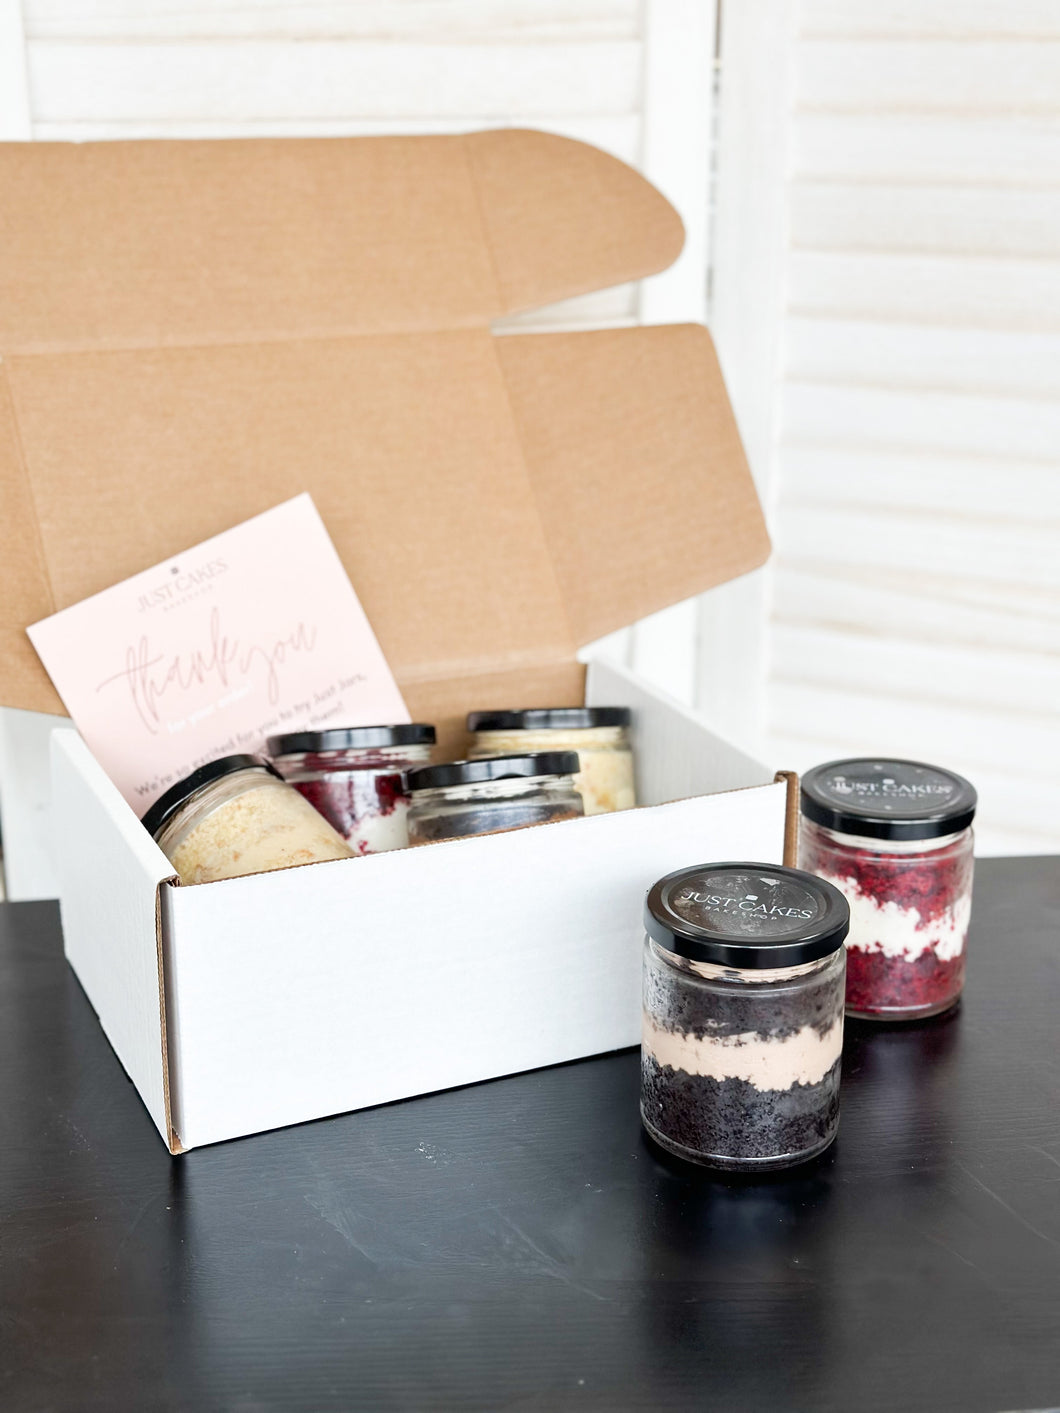 Build Your Own Jar Box - 4 pack (Shippable!)